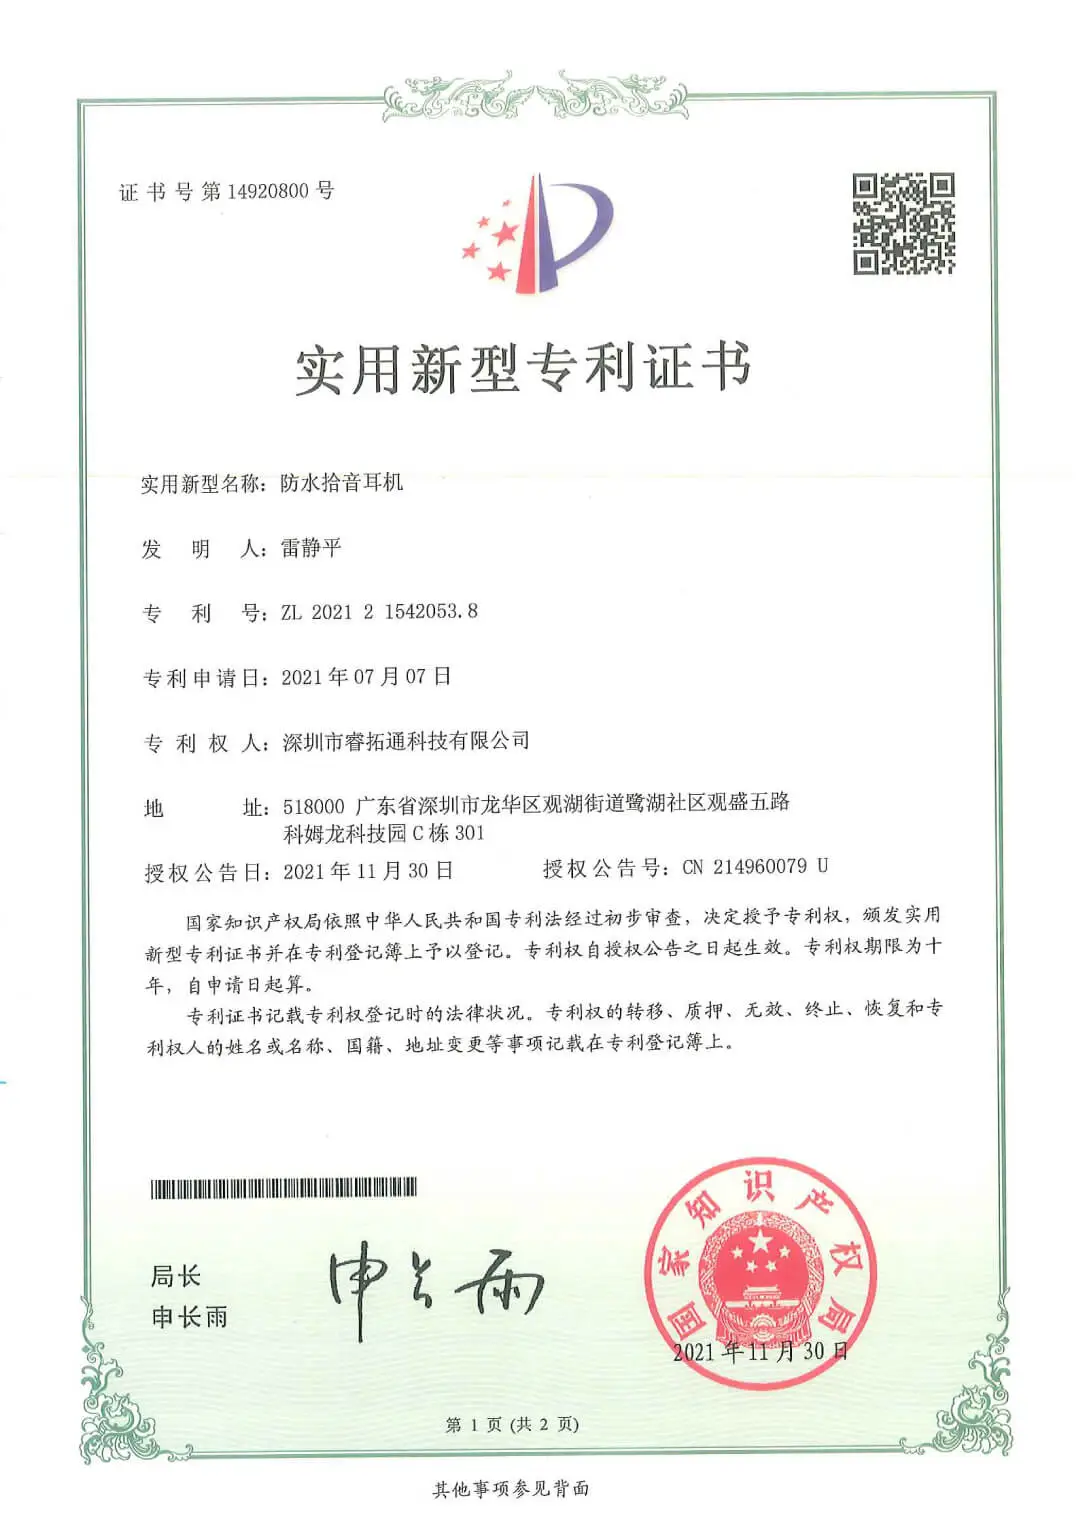 the utility model patent certificate of the waterproof sound pickup earphone